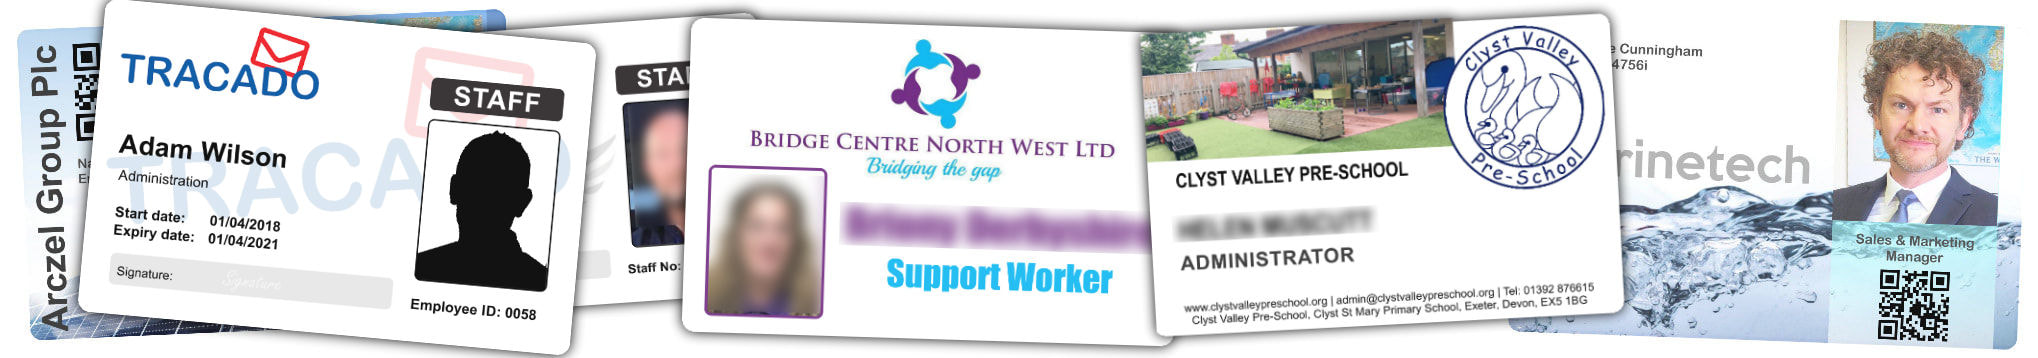 Ipswich examples of staff photo ID cards | samples of employee Identity card printing | Workers ID cards printed in 